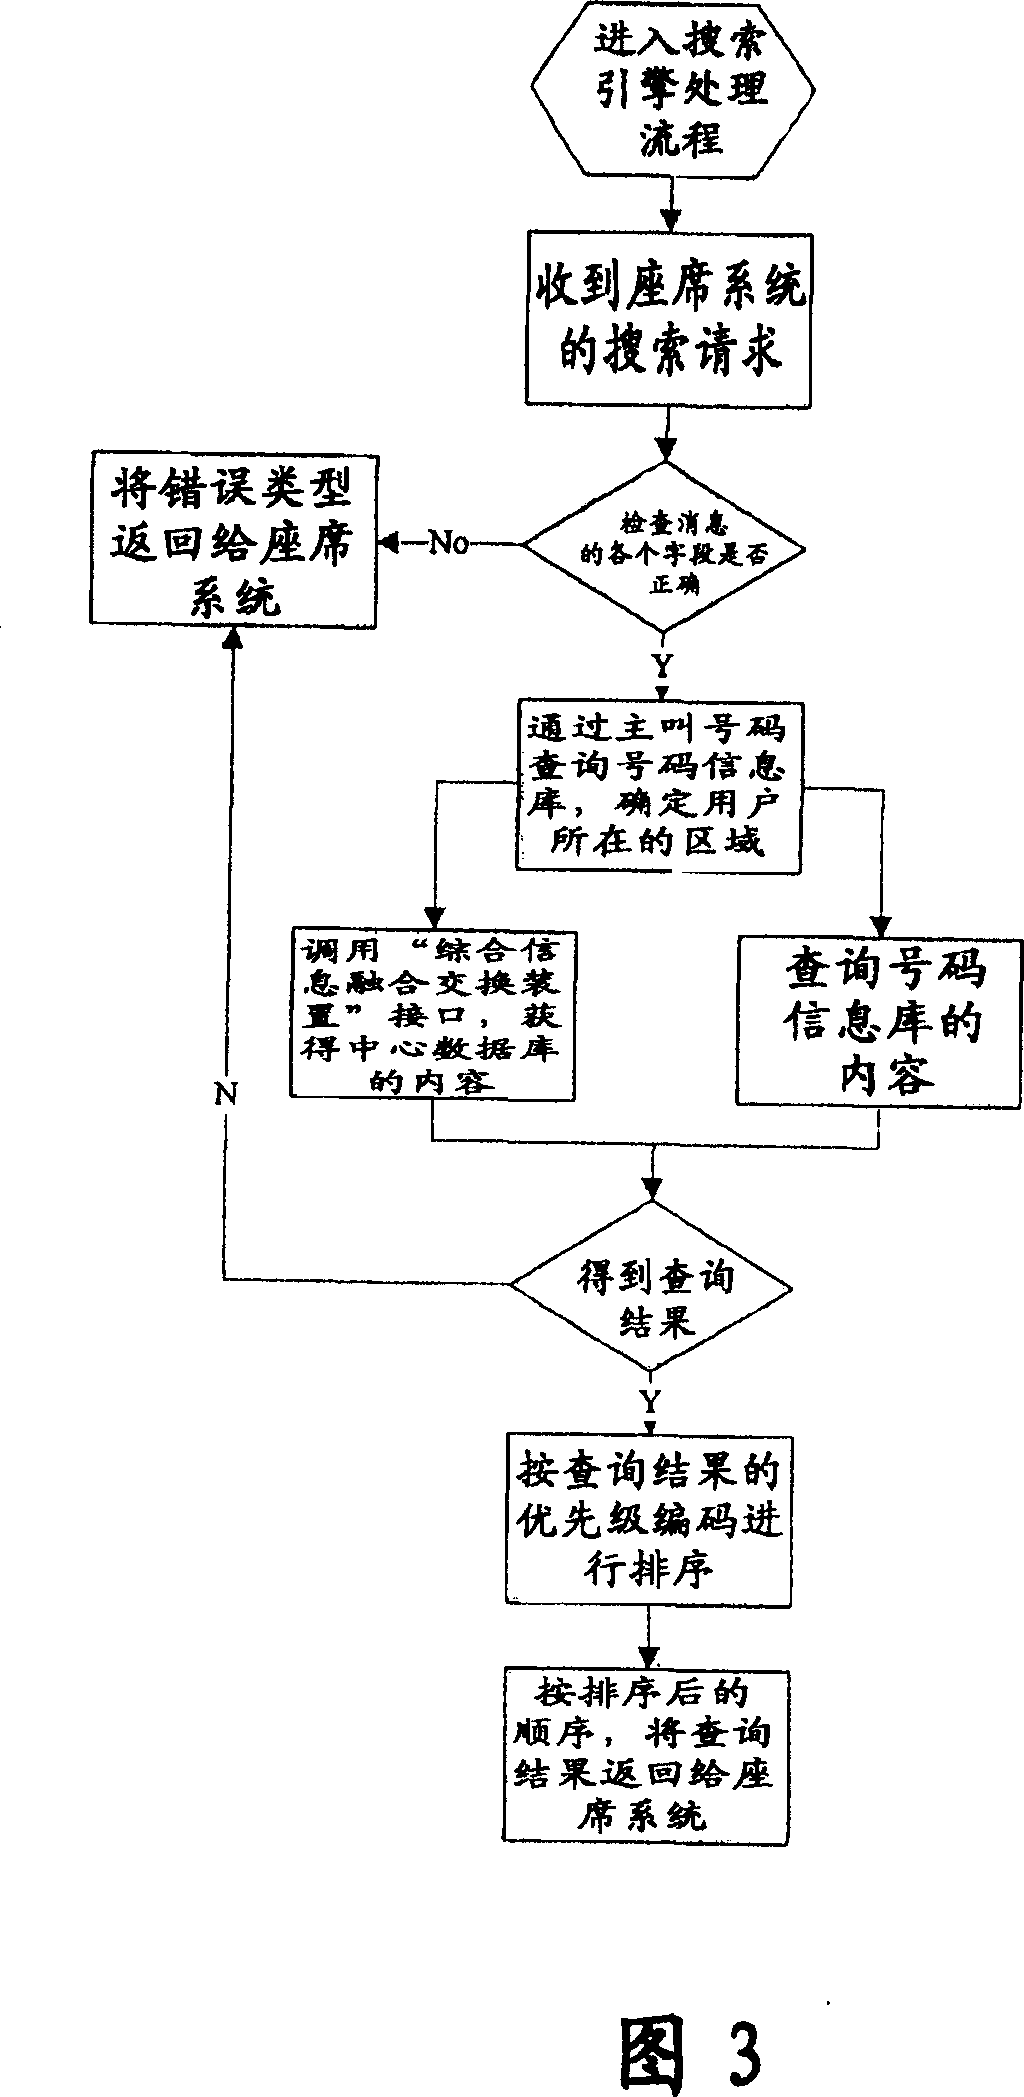 Telecom integrated information system and method